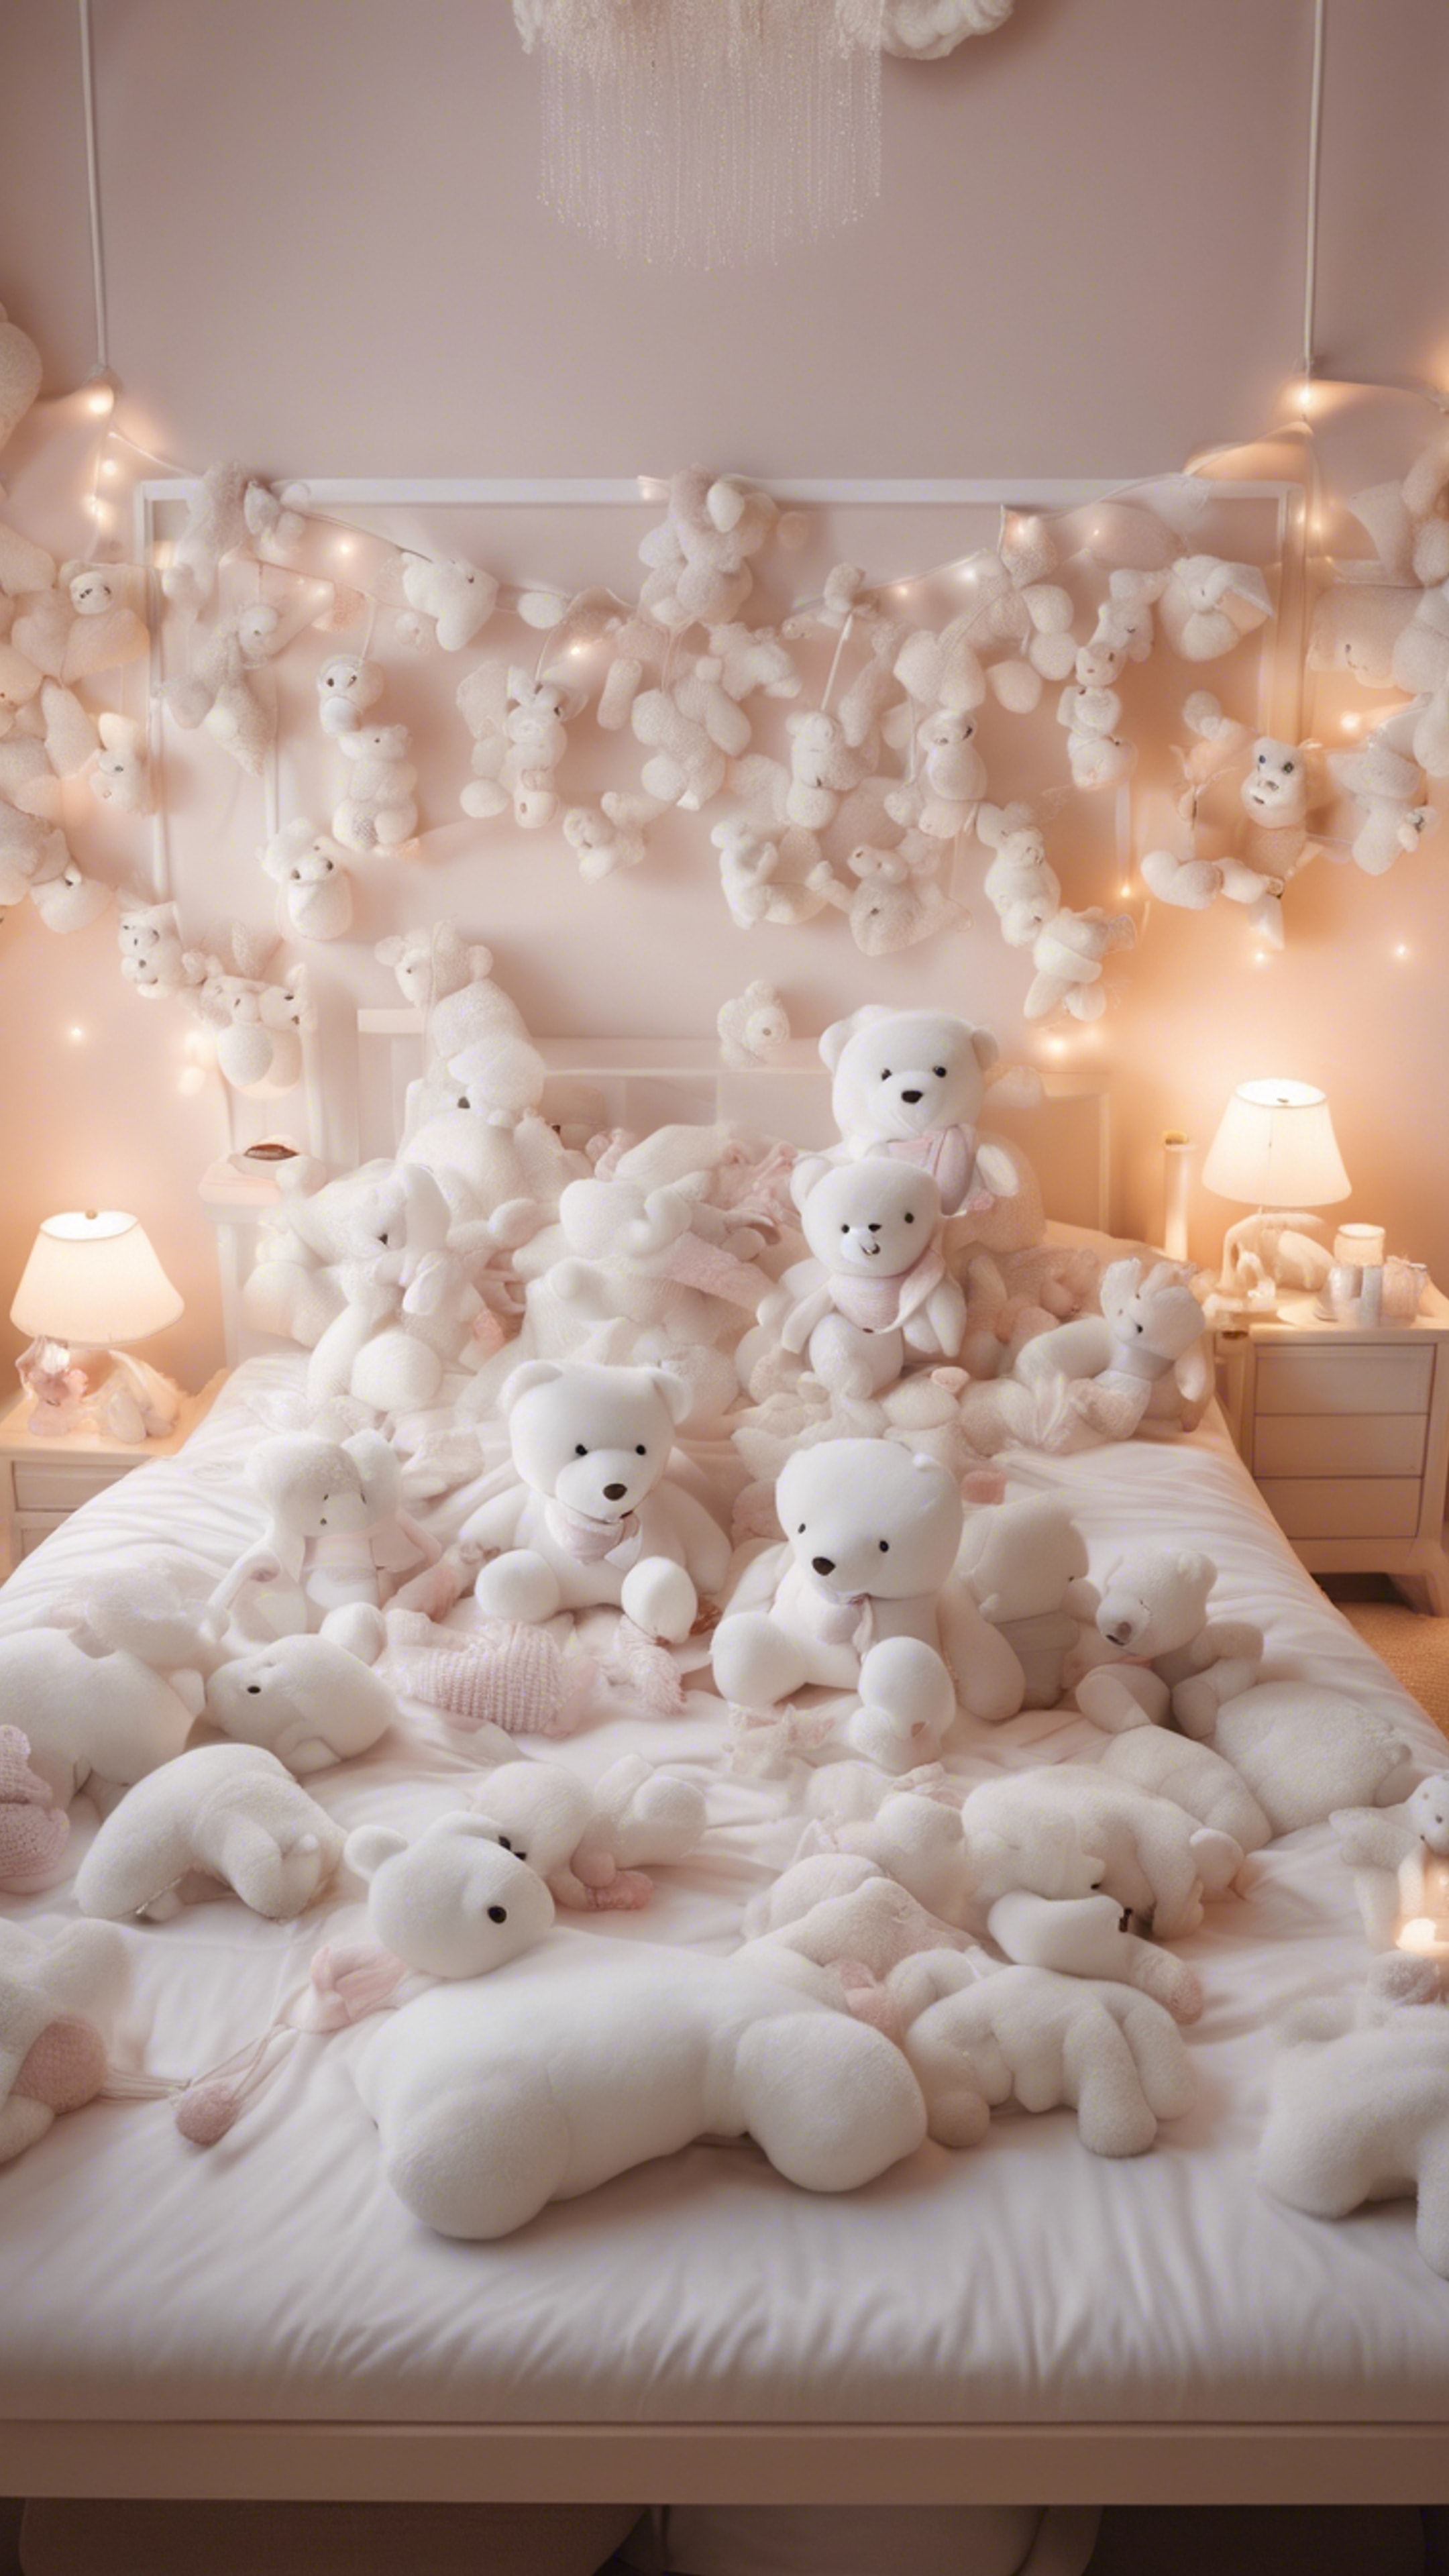 A kawaii style decorated bedroom, filled with white teddies and cushions. Papel de parede[9112291410ac42cead00]